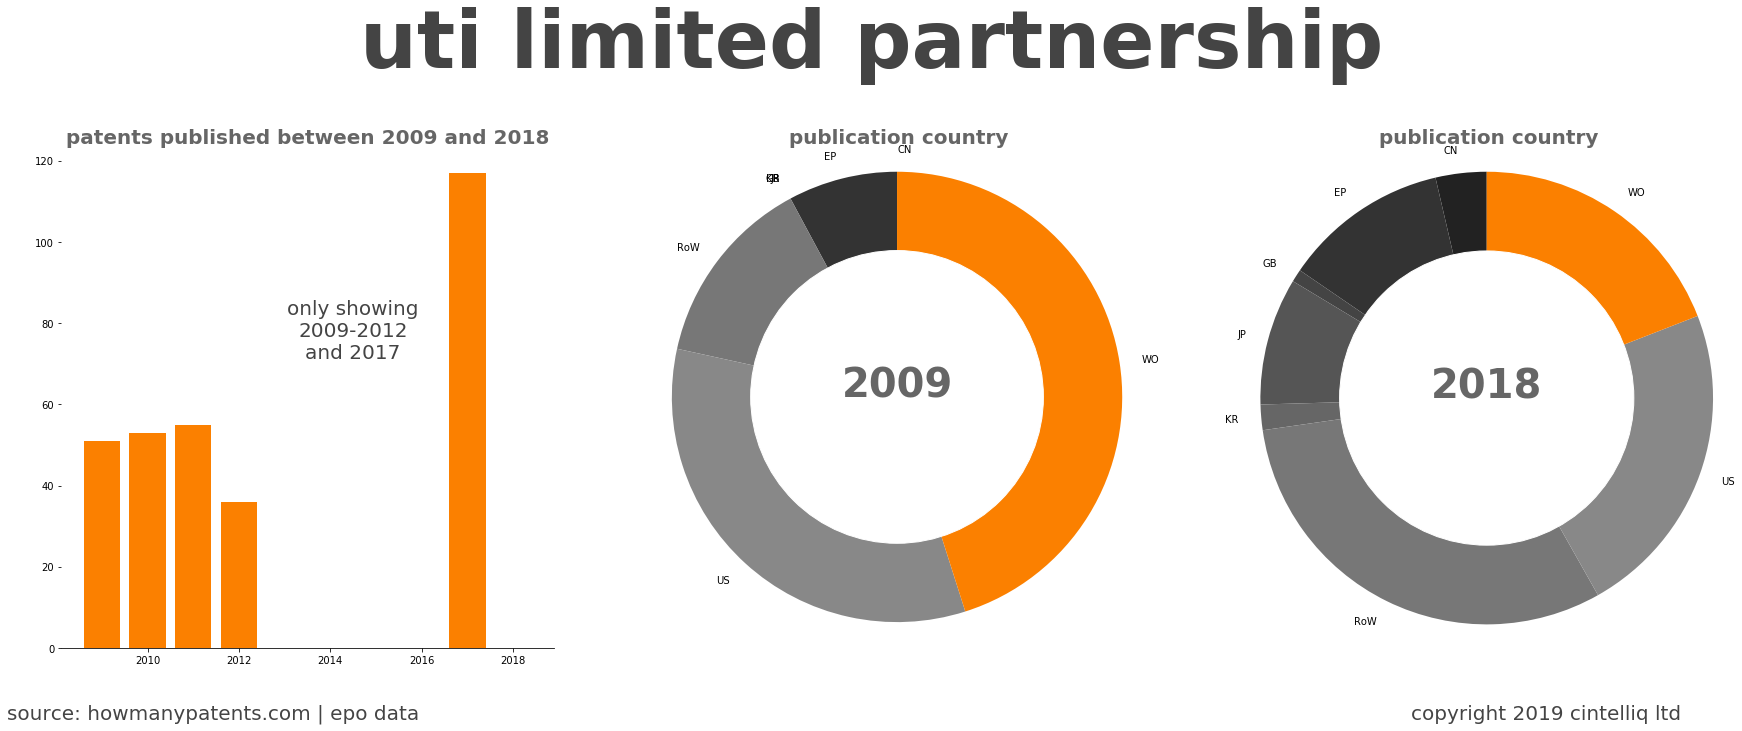 summary of patents for Uti Limited Partnership